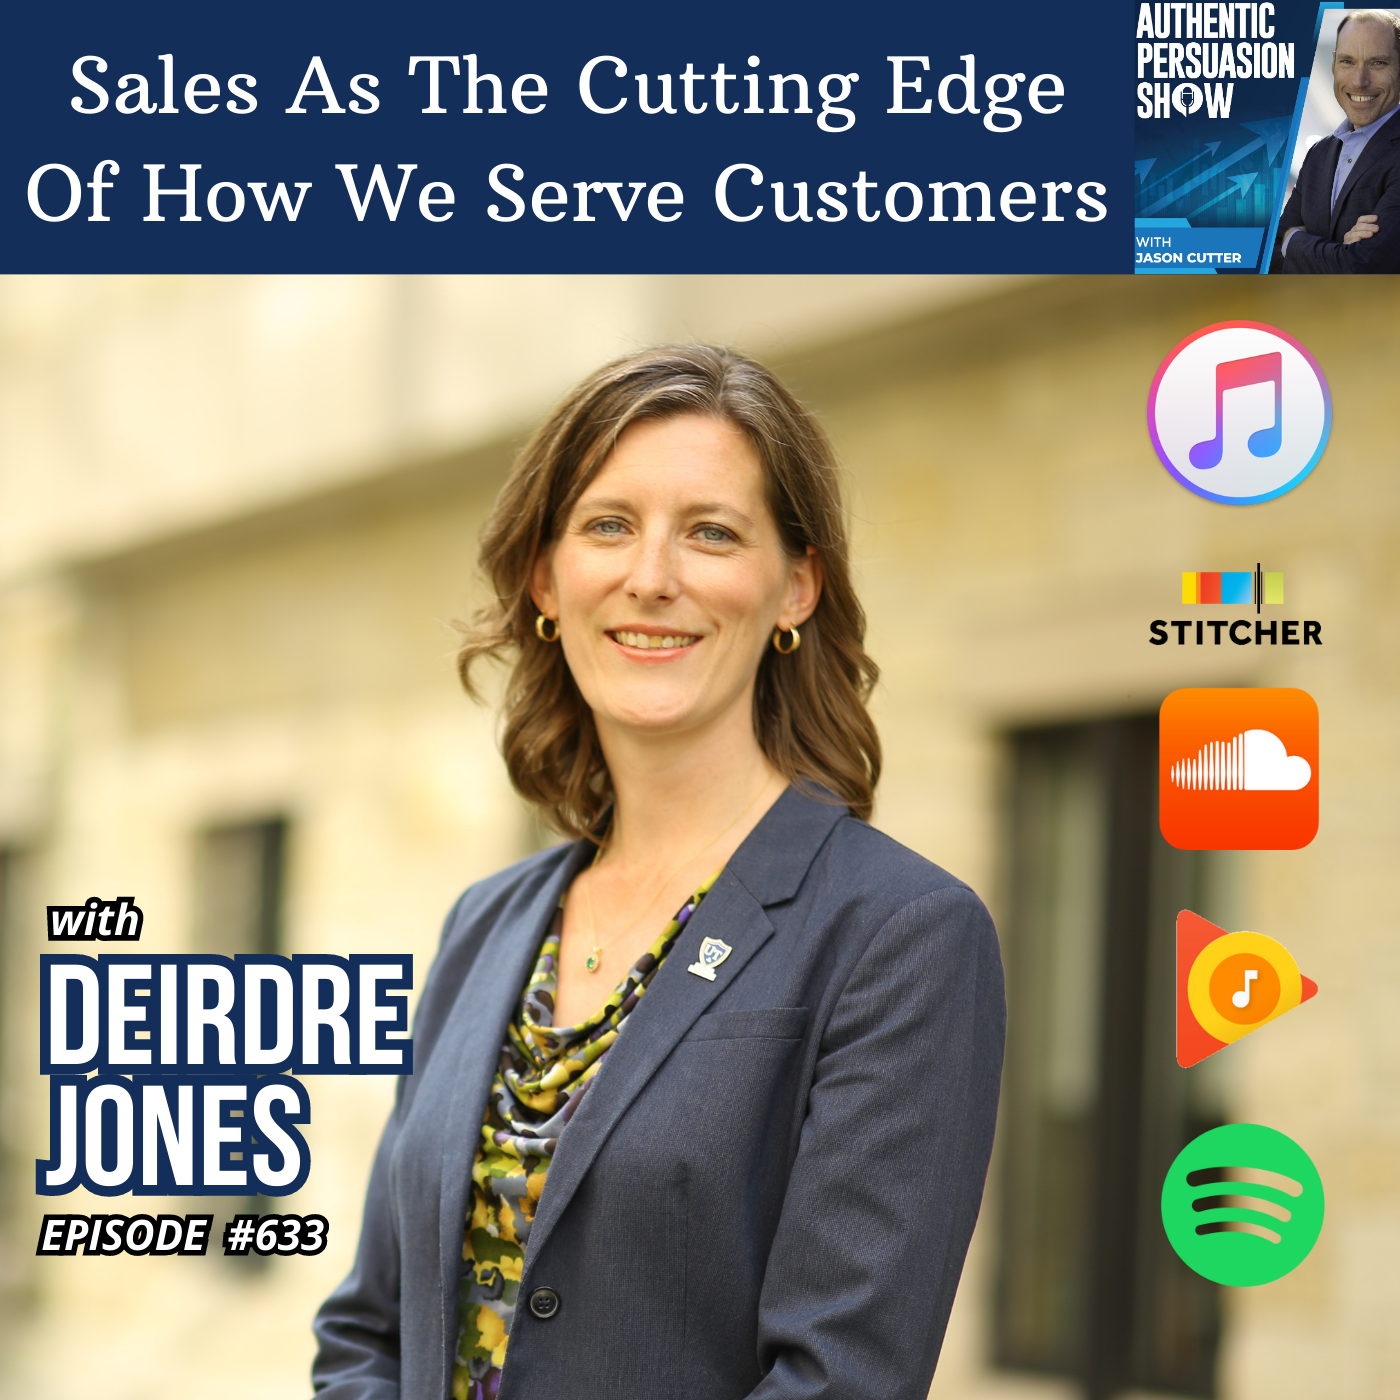 [633] Sales As The Cutting Edge Of How We Serve Customers, with Deirdre Jones from University of Toledo